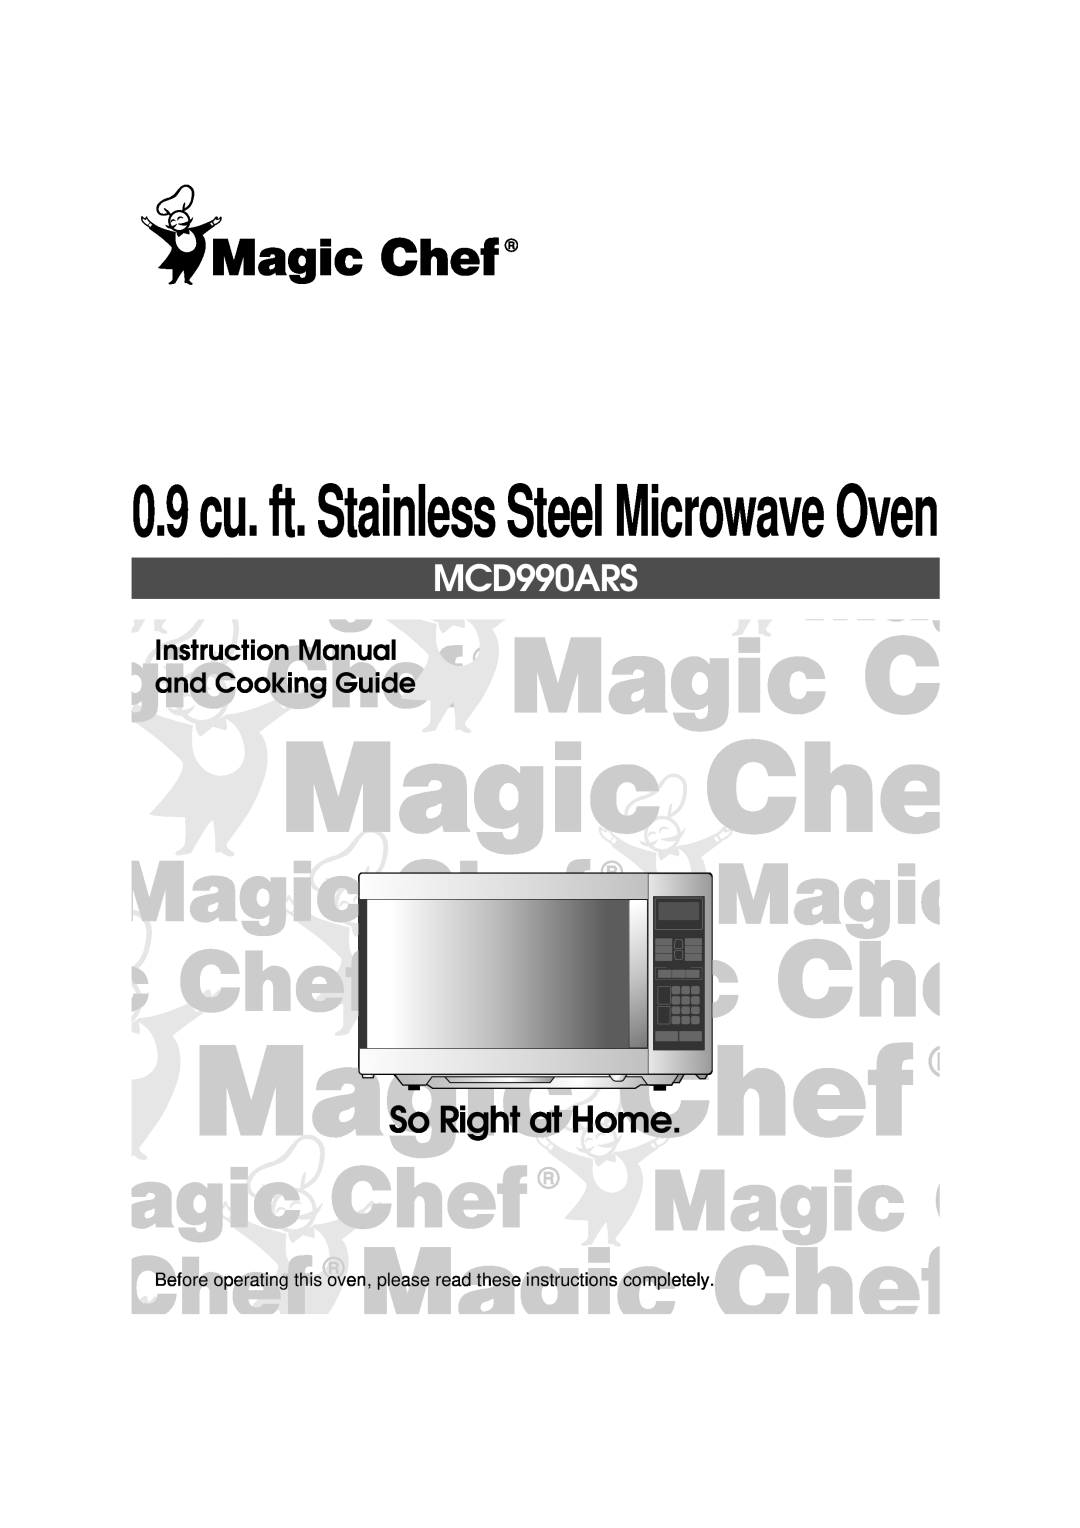 Magic Chef MCD990ARS instruction manual 0.9 cu. ft. Stainless Steel Microwave Oven, So Right at Home 